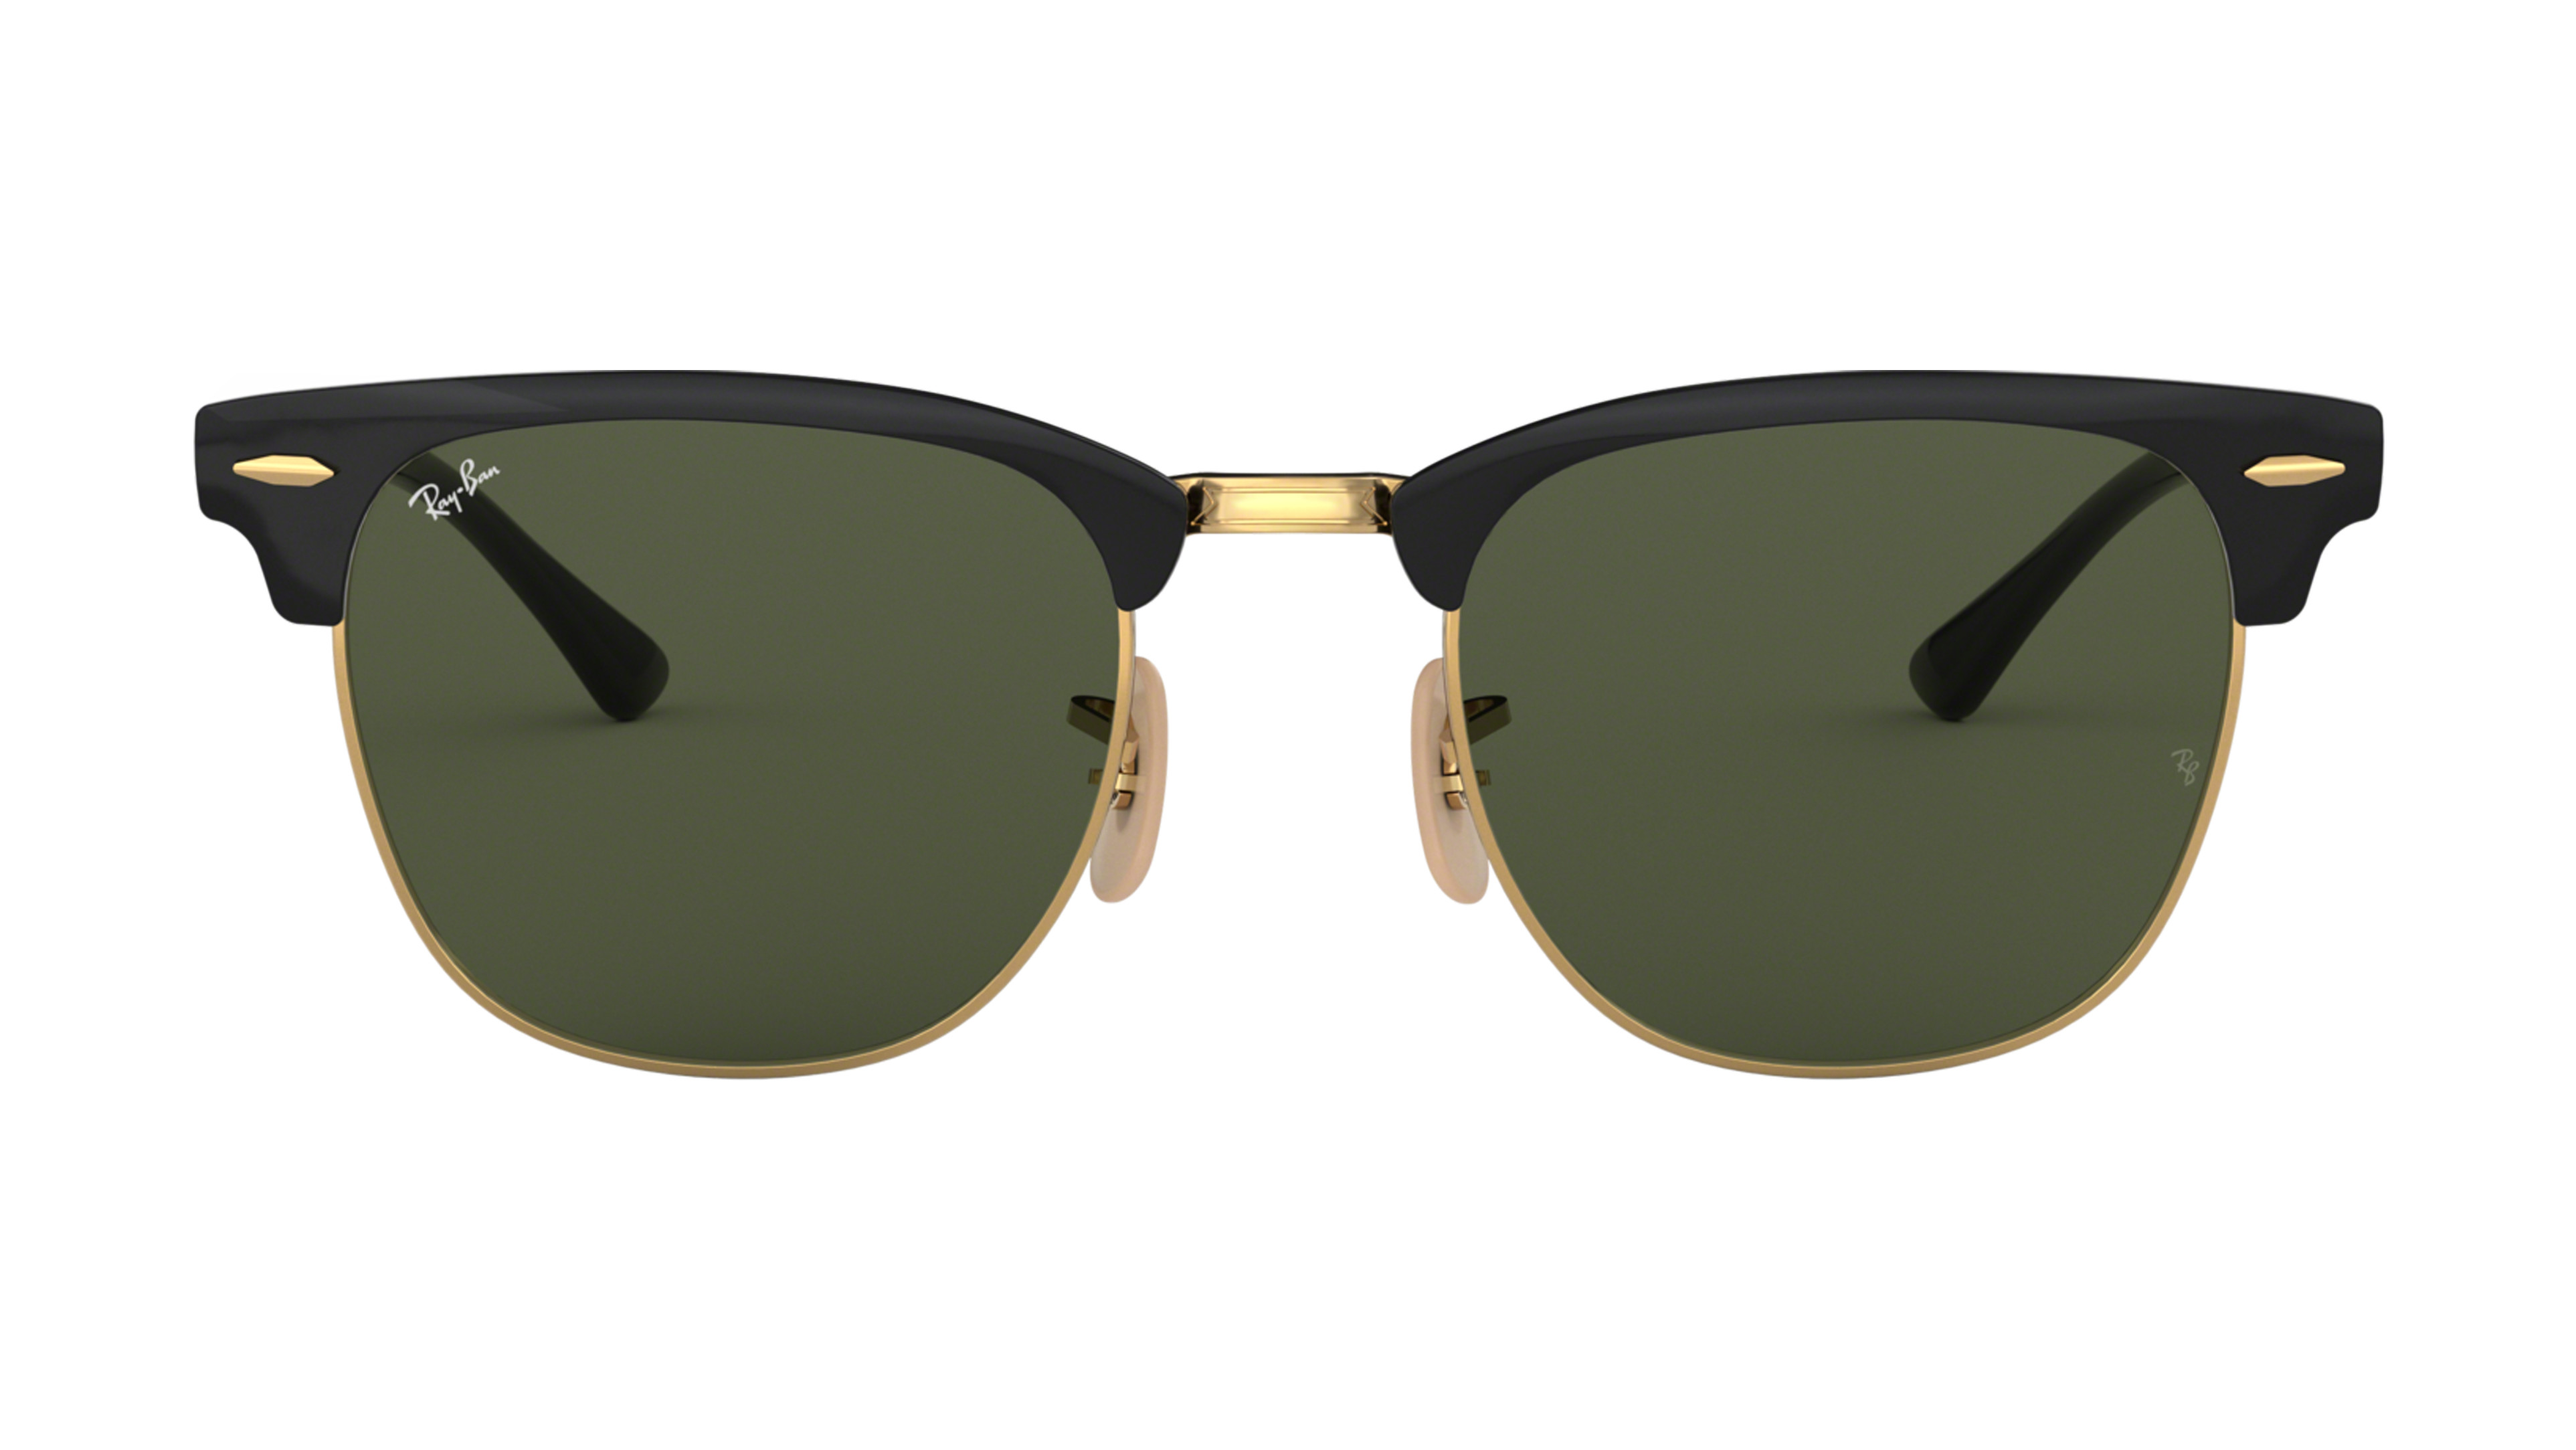 [products.image.front] Ray-Ban CLUBMASTER METAL 0RB3716 187 Sonnenbrille